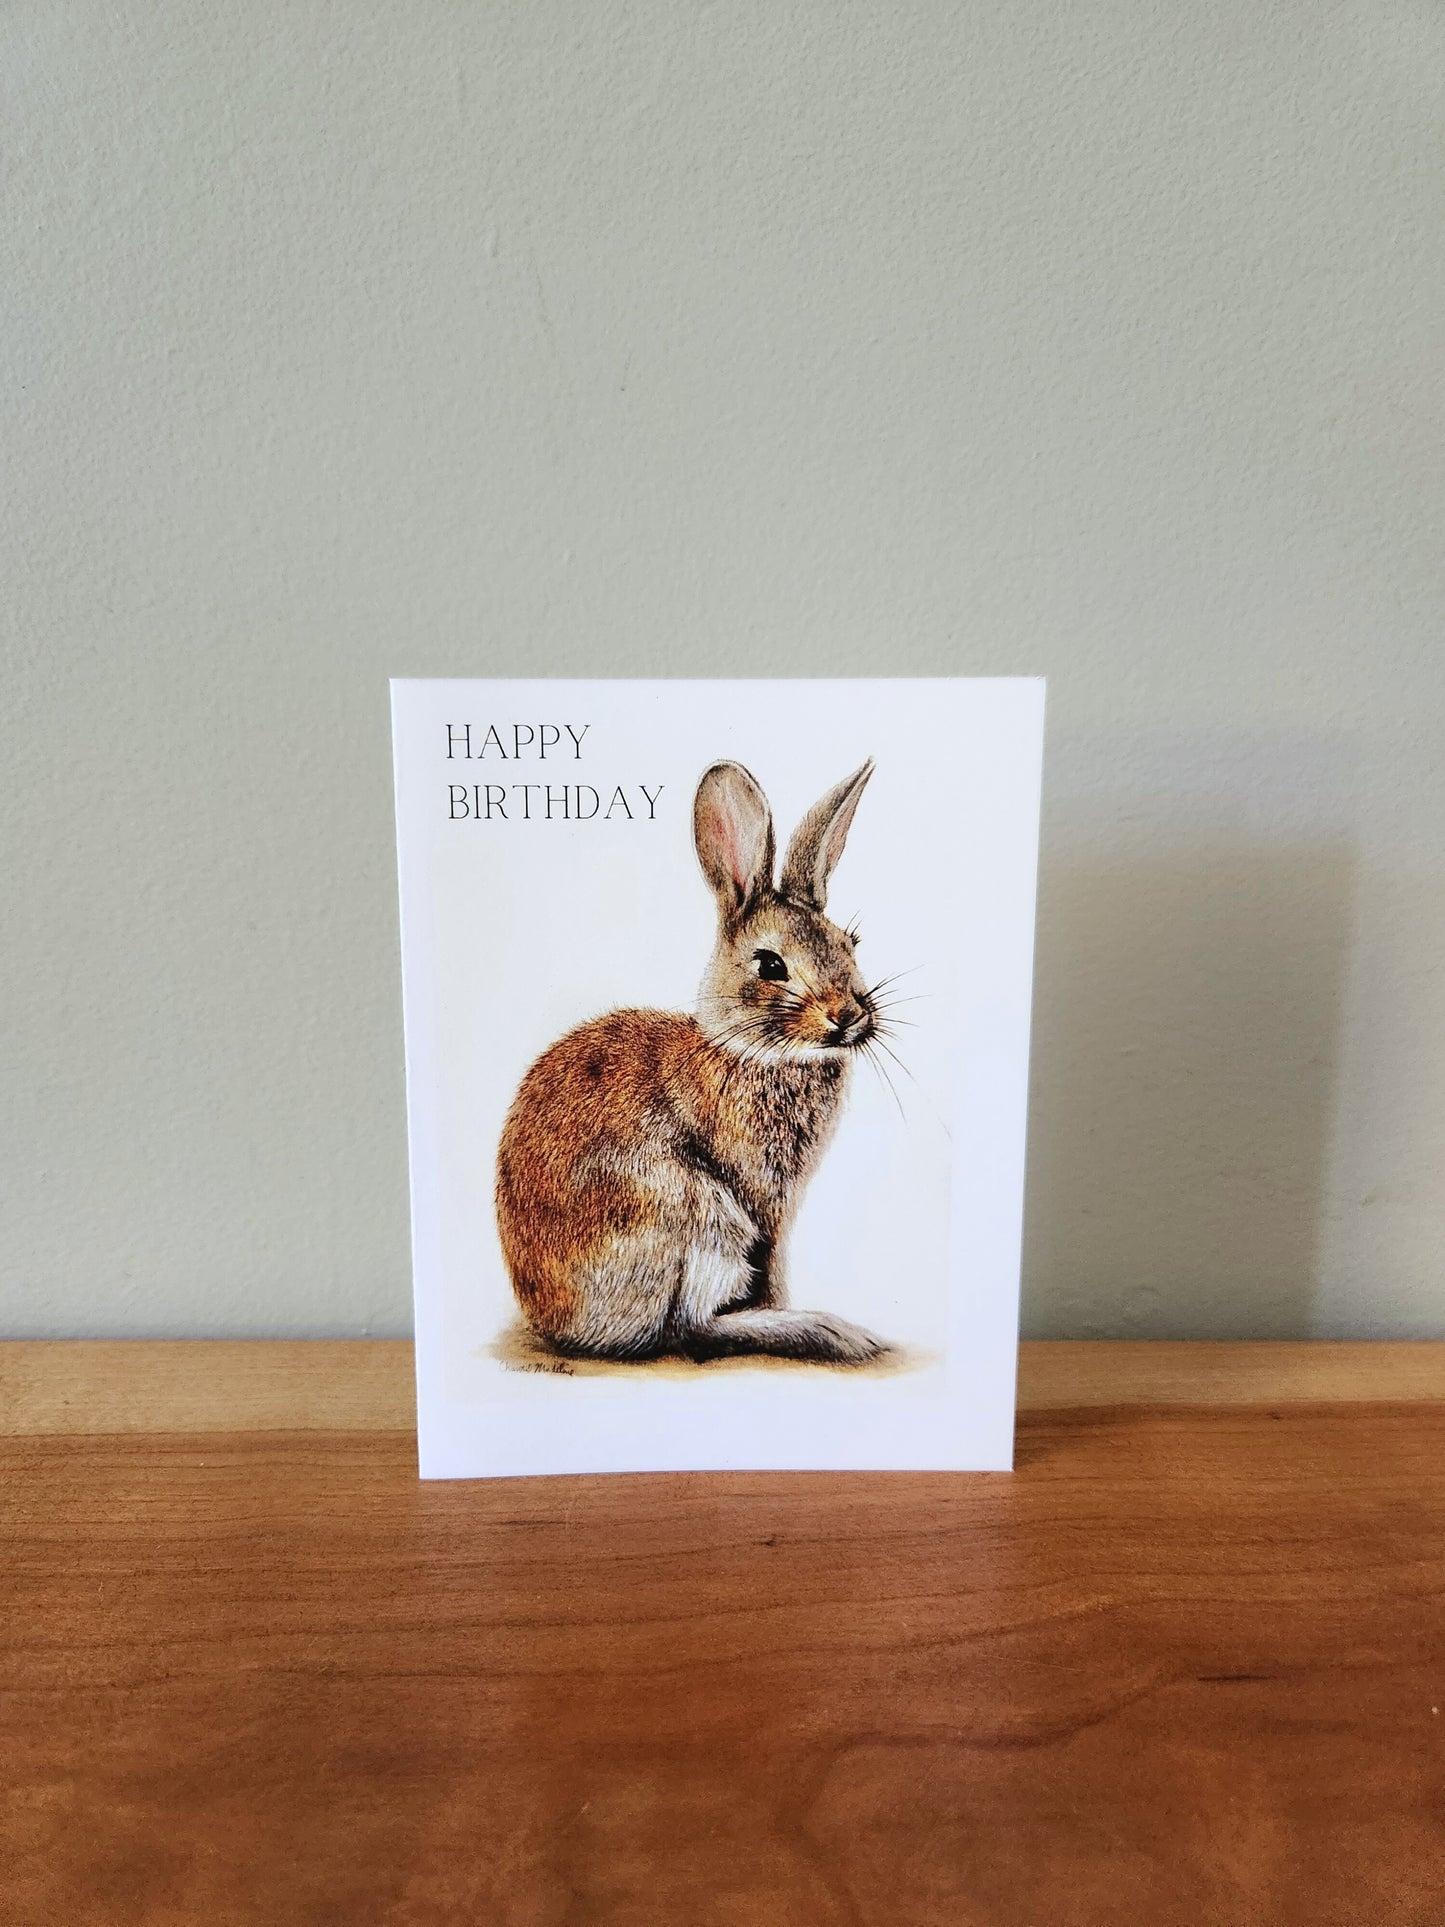 Happy birthday woodland bunny card, Cute rabbit birthday card for friend, Co worker, Husband, Wife, Partner, Nature animal lover greeting